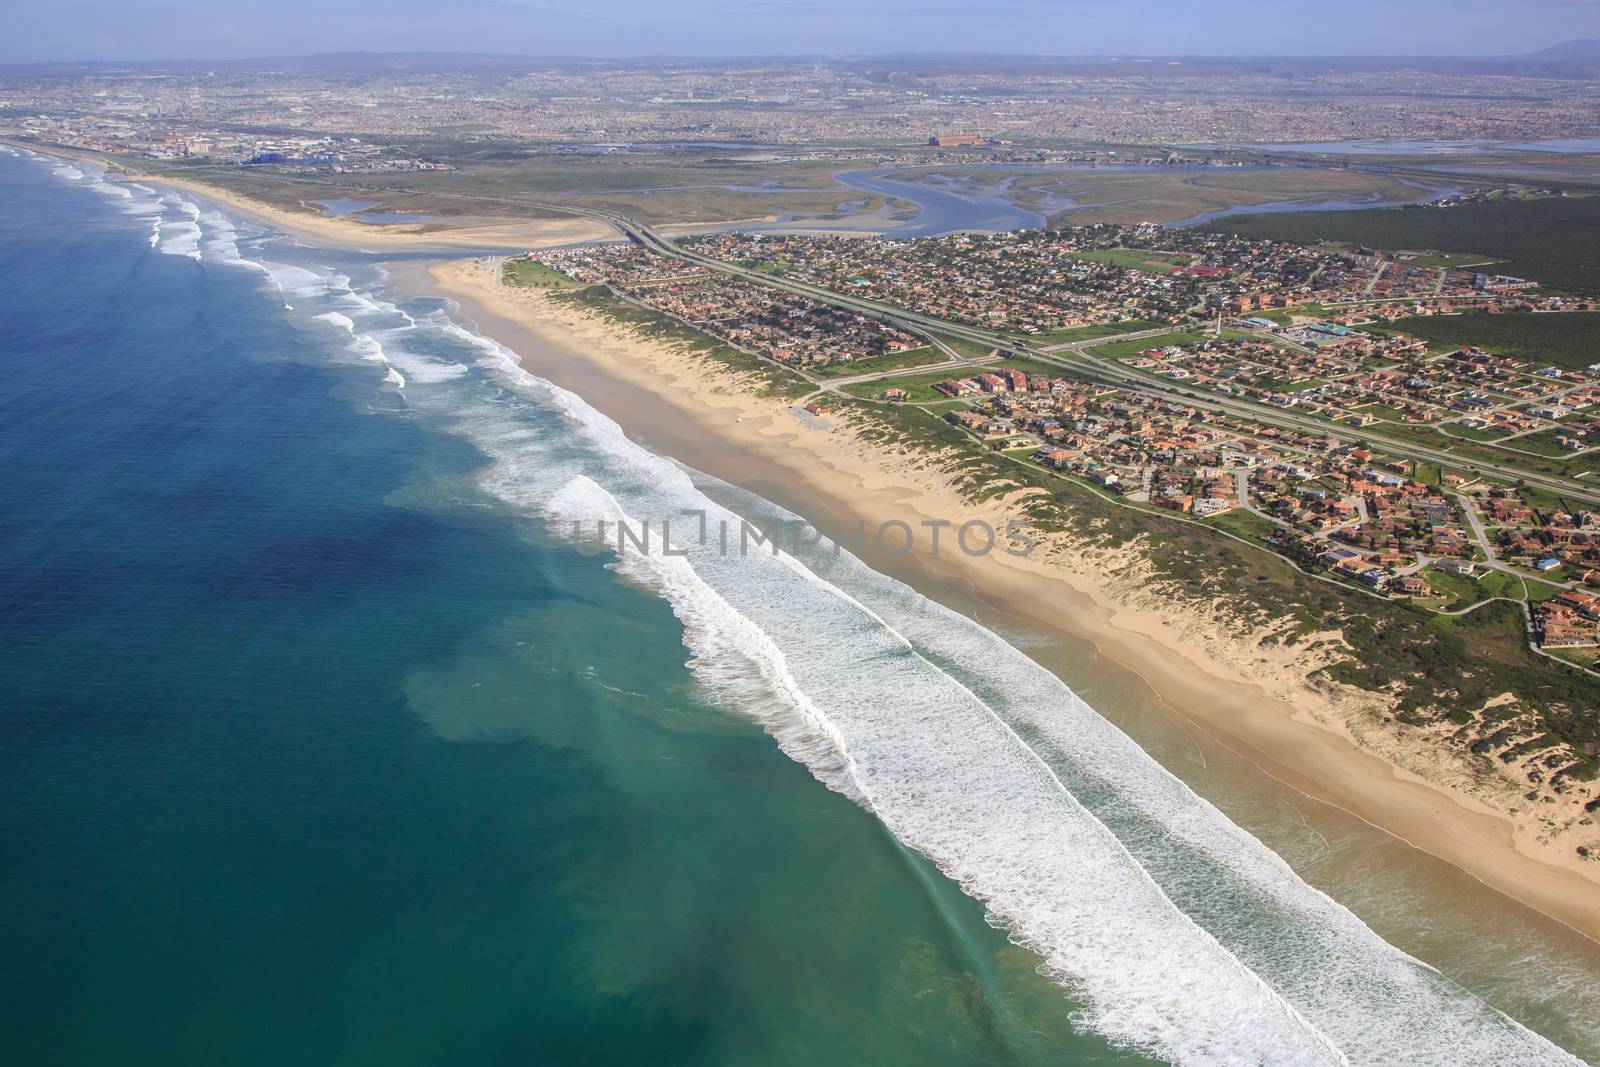 Aerial view of Swartkops River mouth and estuary in South Africa